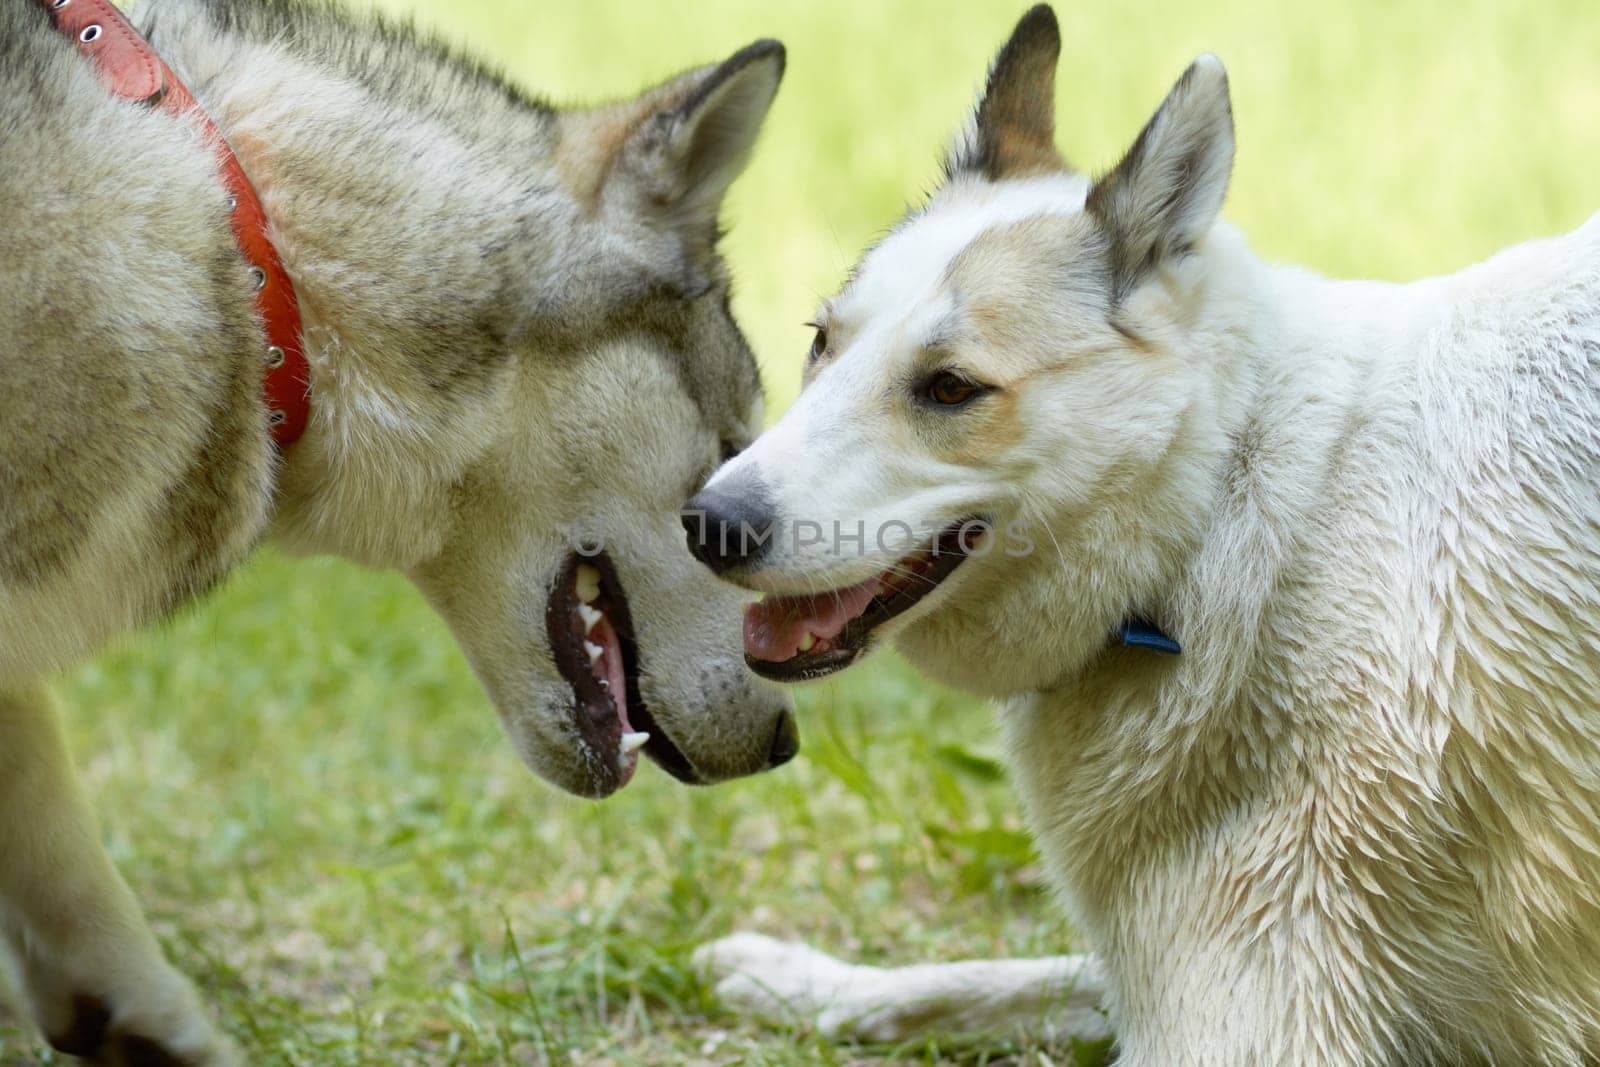 Dogs, play and park with animal meeting on grass in summer together with pet. Nature, dog and husky friends outdoor on a field with puppy, animals and pets on a lawn feeling happy in countryside by YuriArcurs